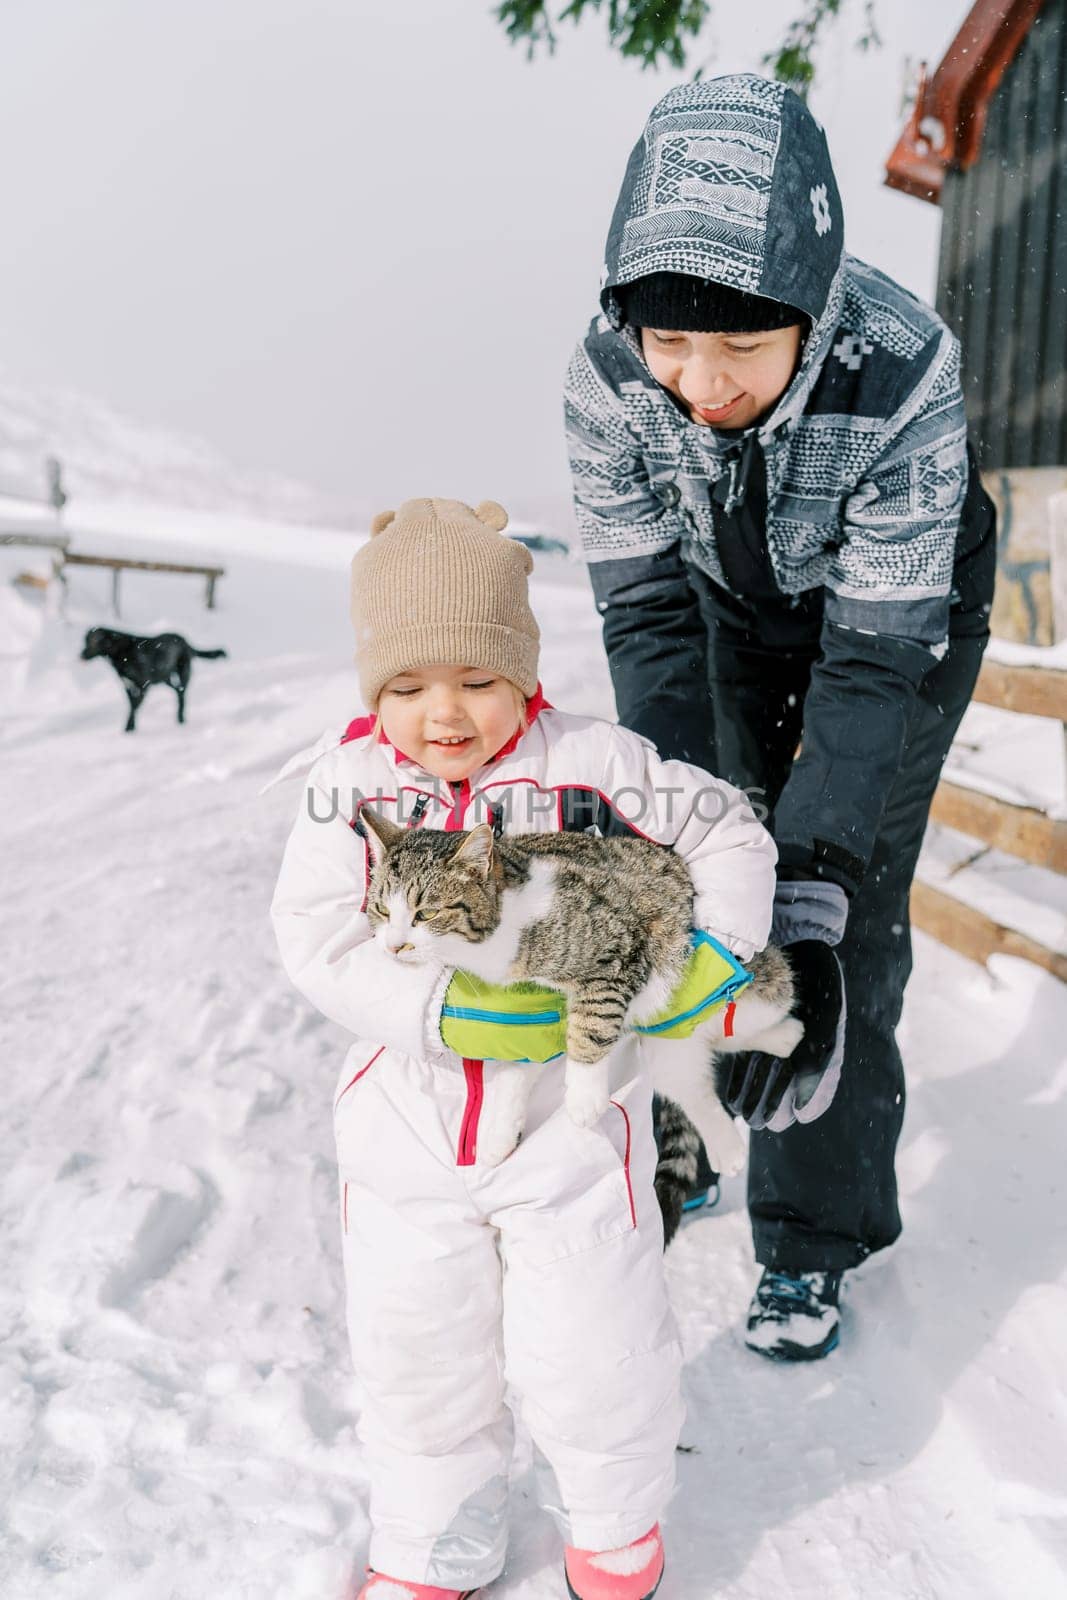 Smiling mother helps a little girl carry a tabby cat in her arms along a snowy road by Nadtochiy